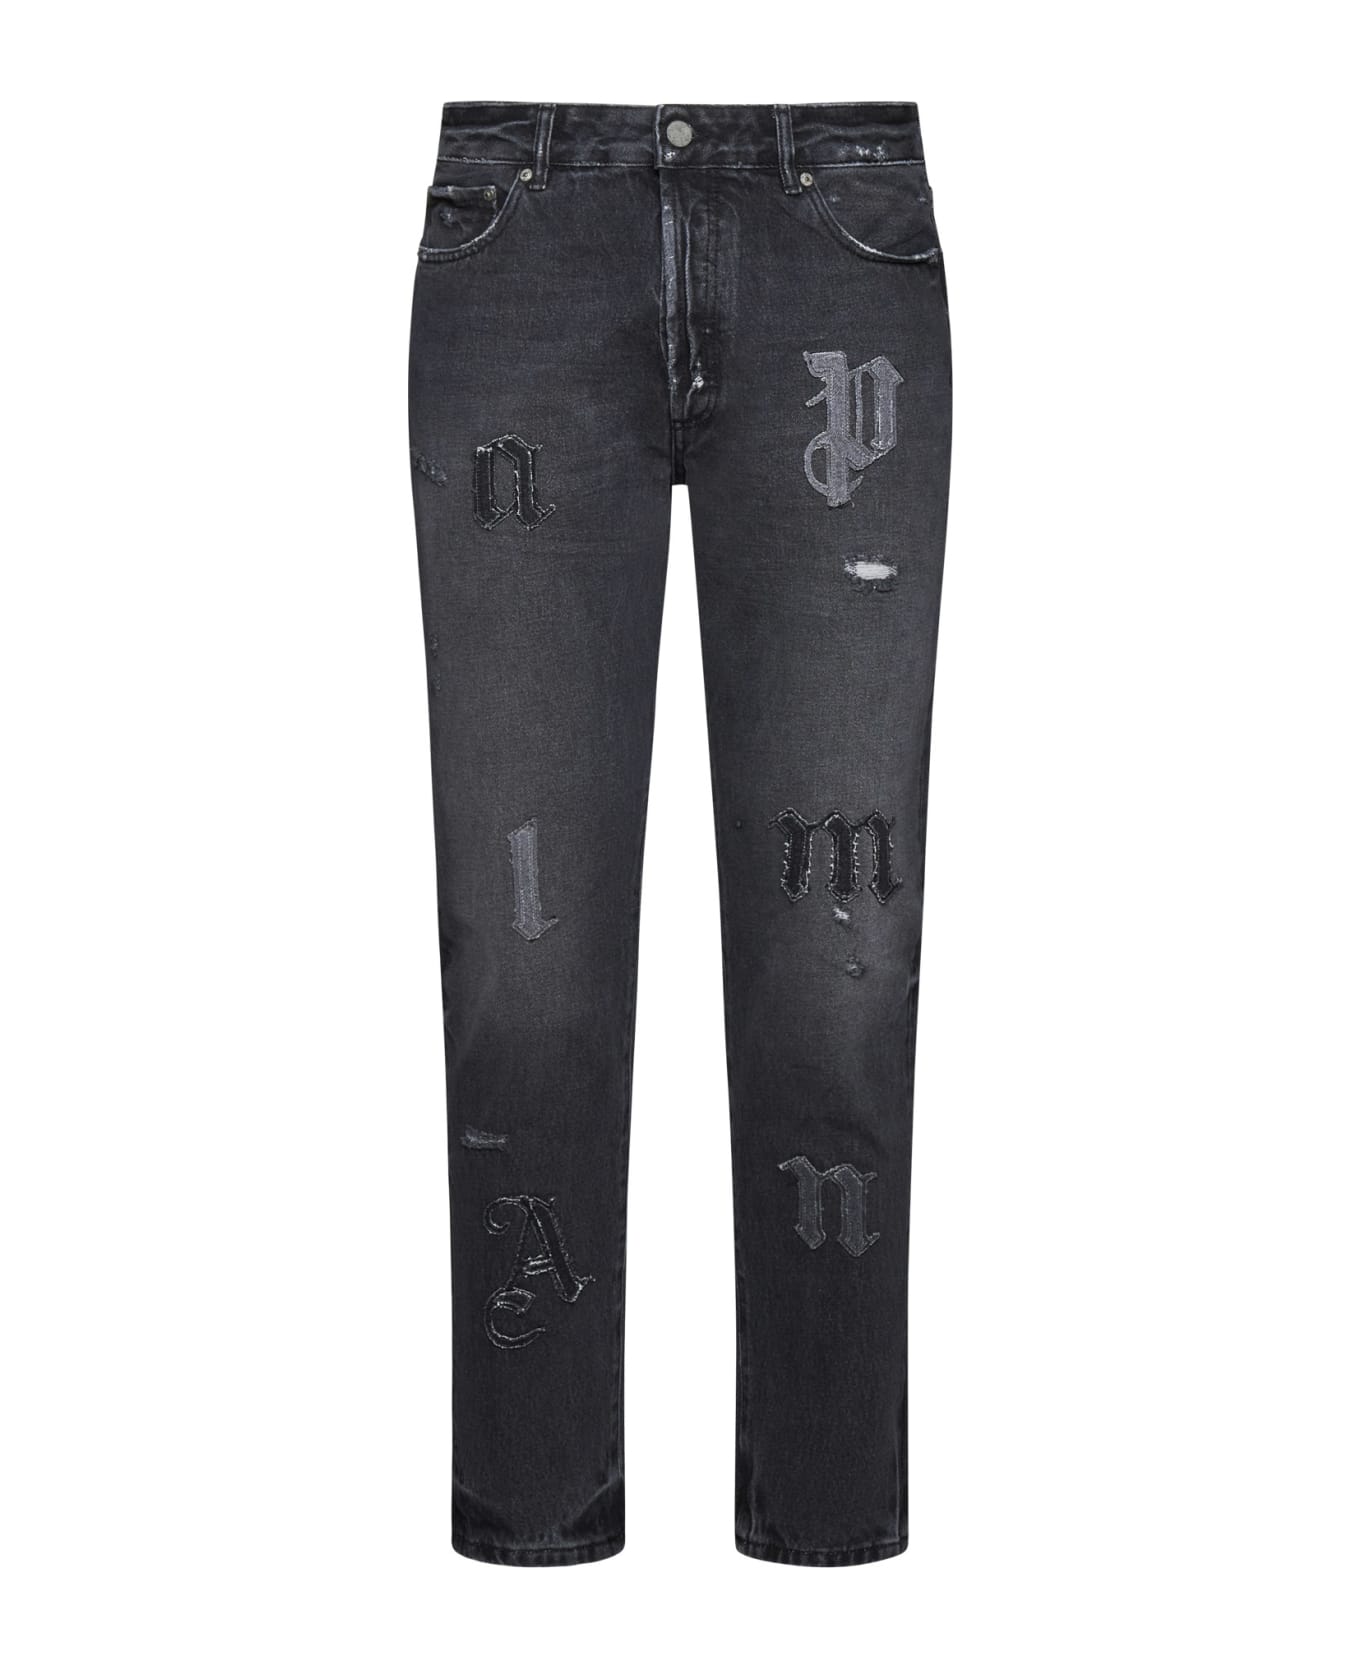 Palm Angels Jeans With Logoed Patches - Black vlack